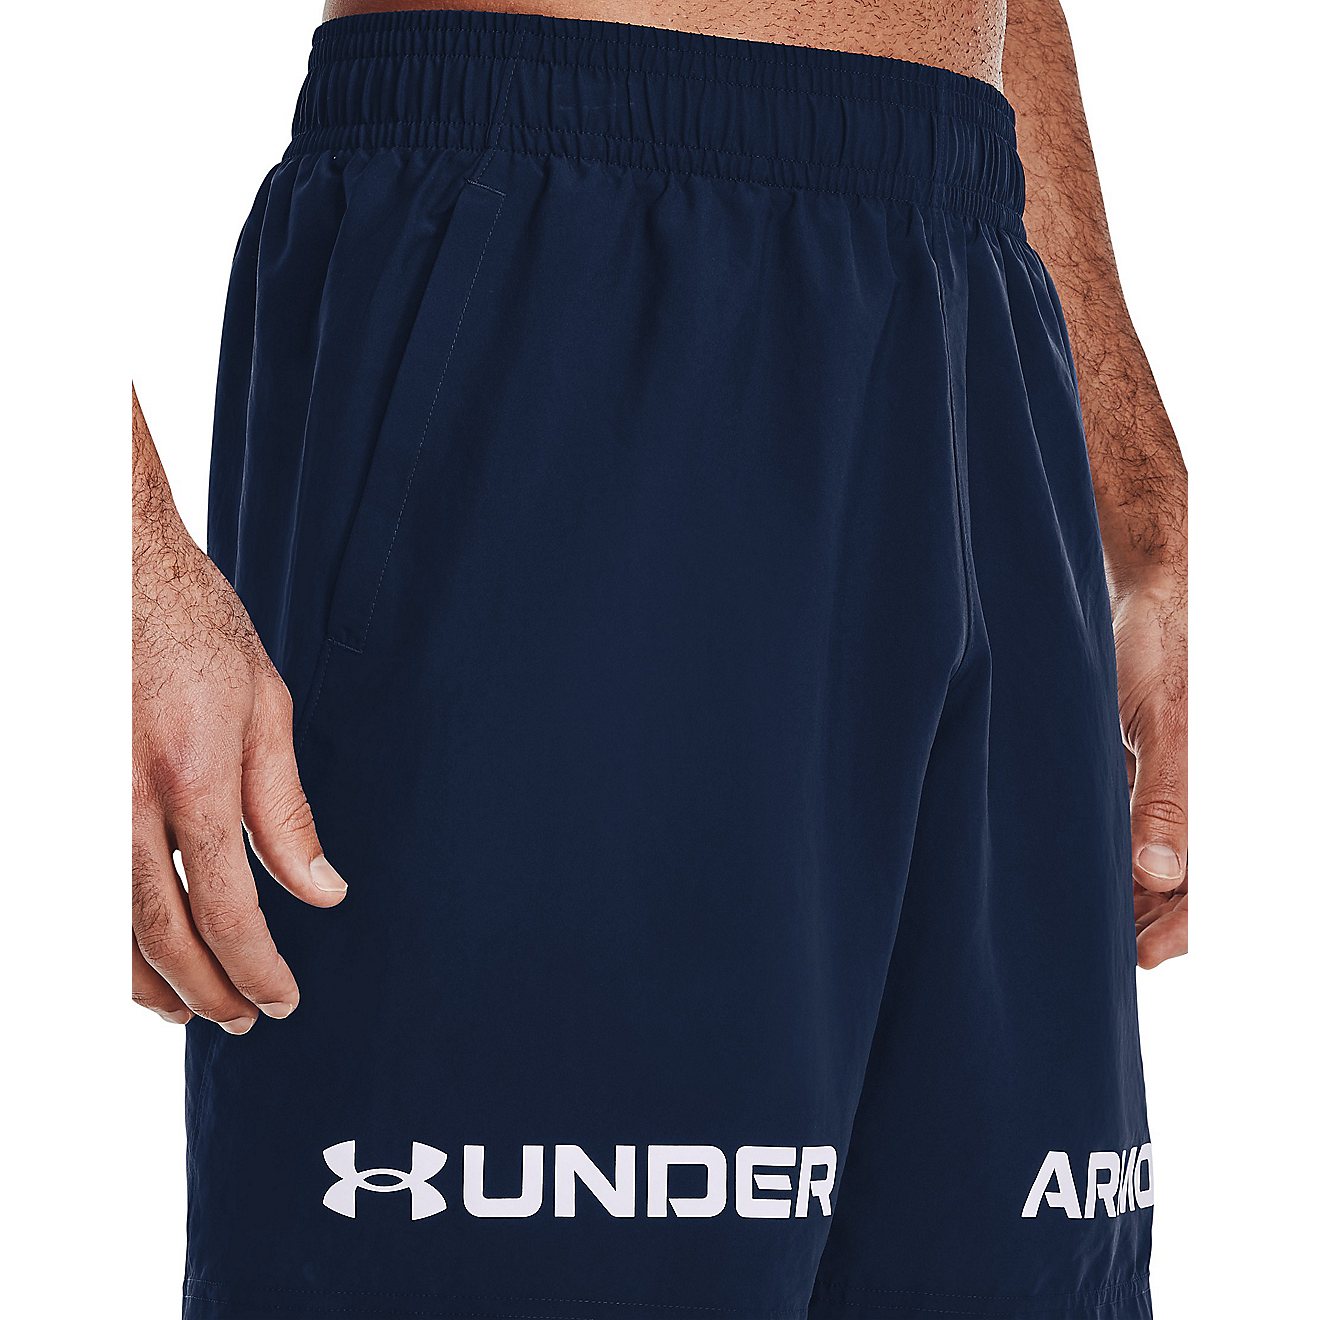 Details about   Under Armour Mens Woven Graphic Wordmark Shorts Lightweight 8" Gym Football 